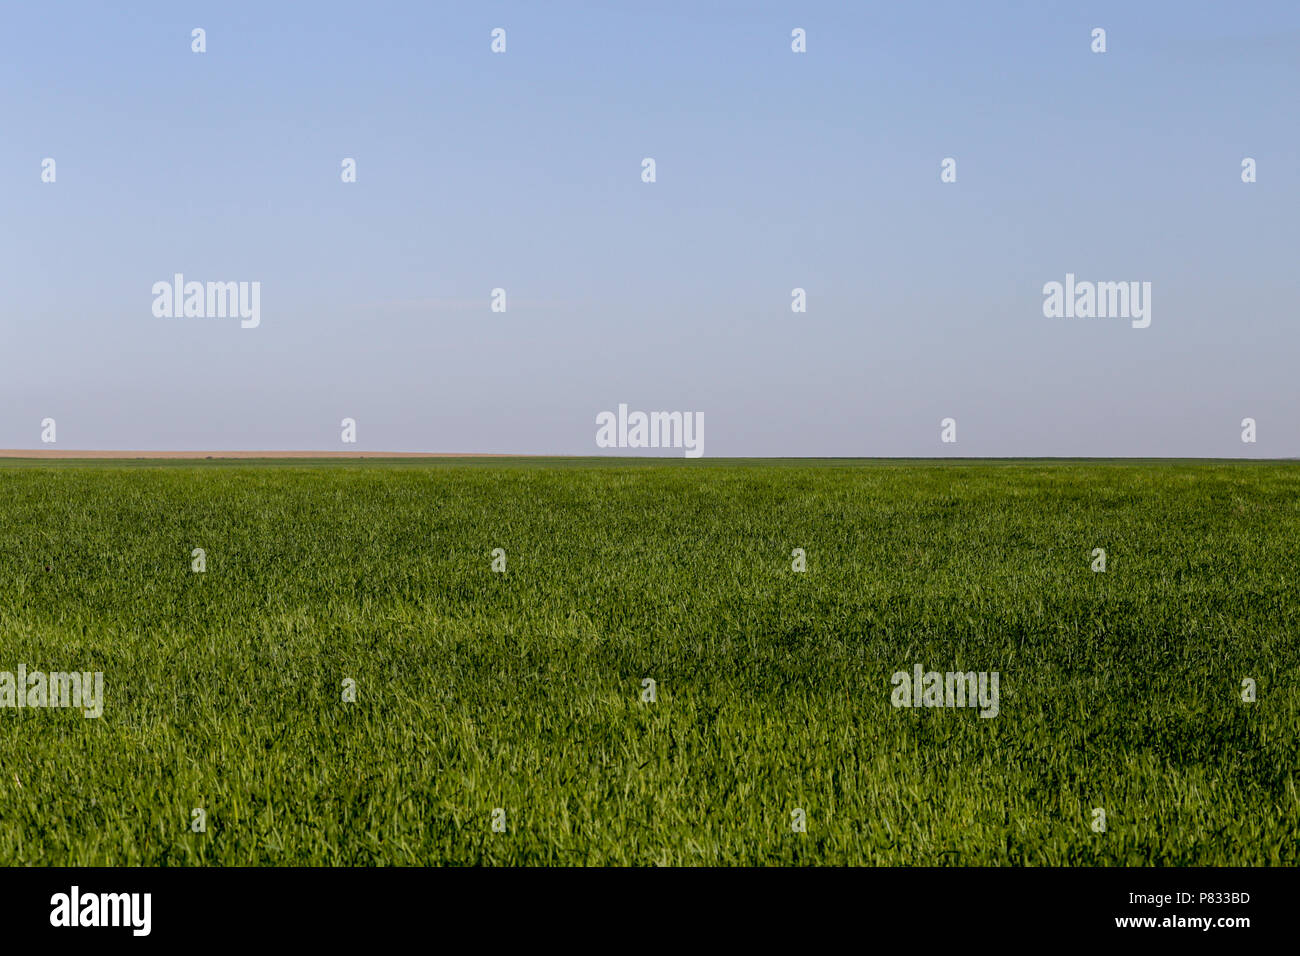 A green wheat field on a windy day. Stock Photo